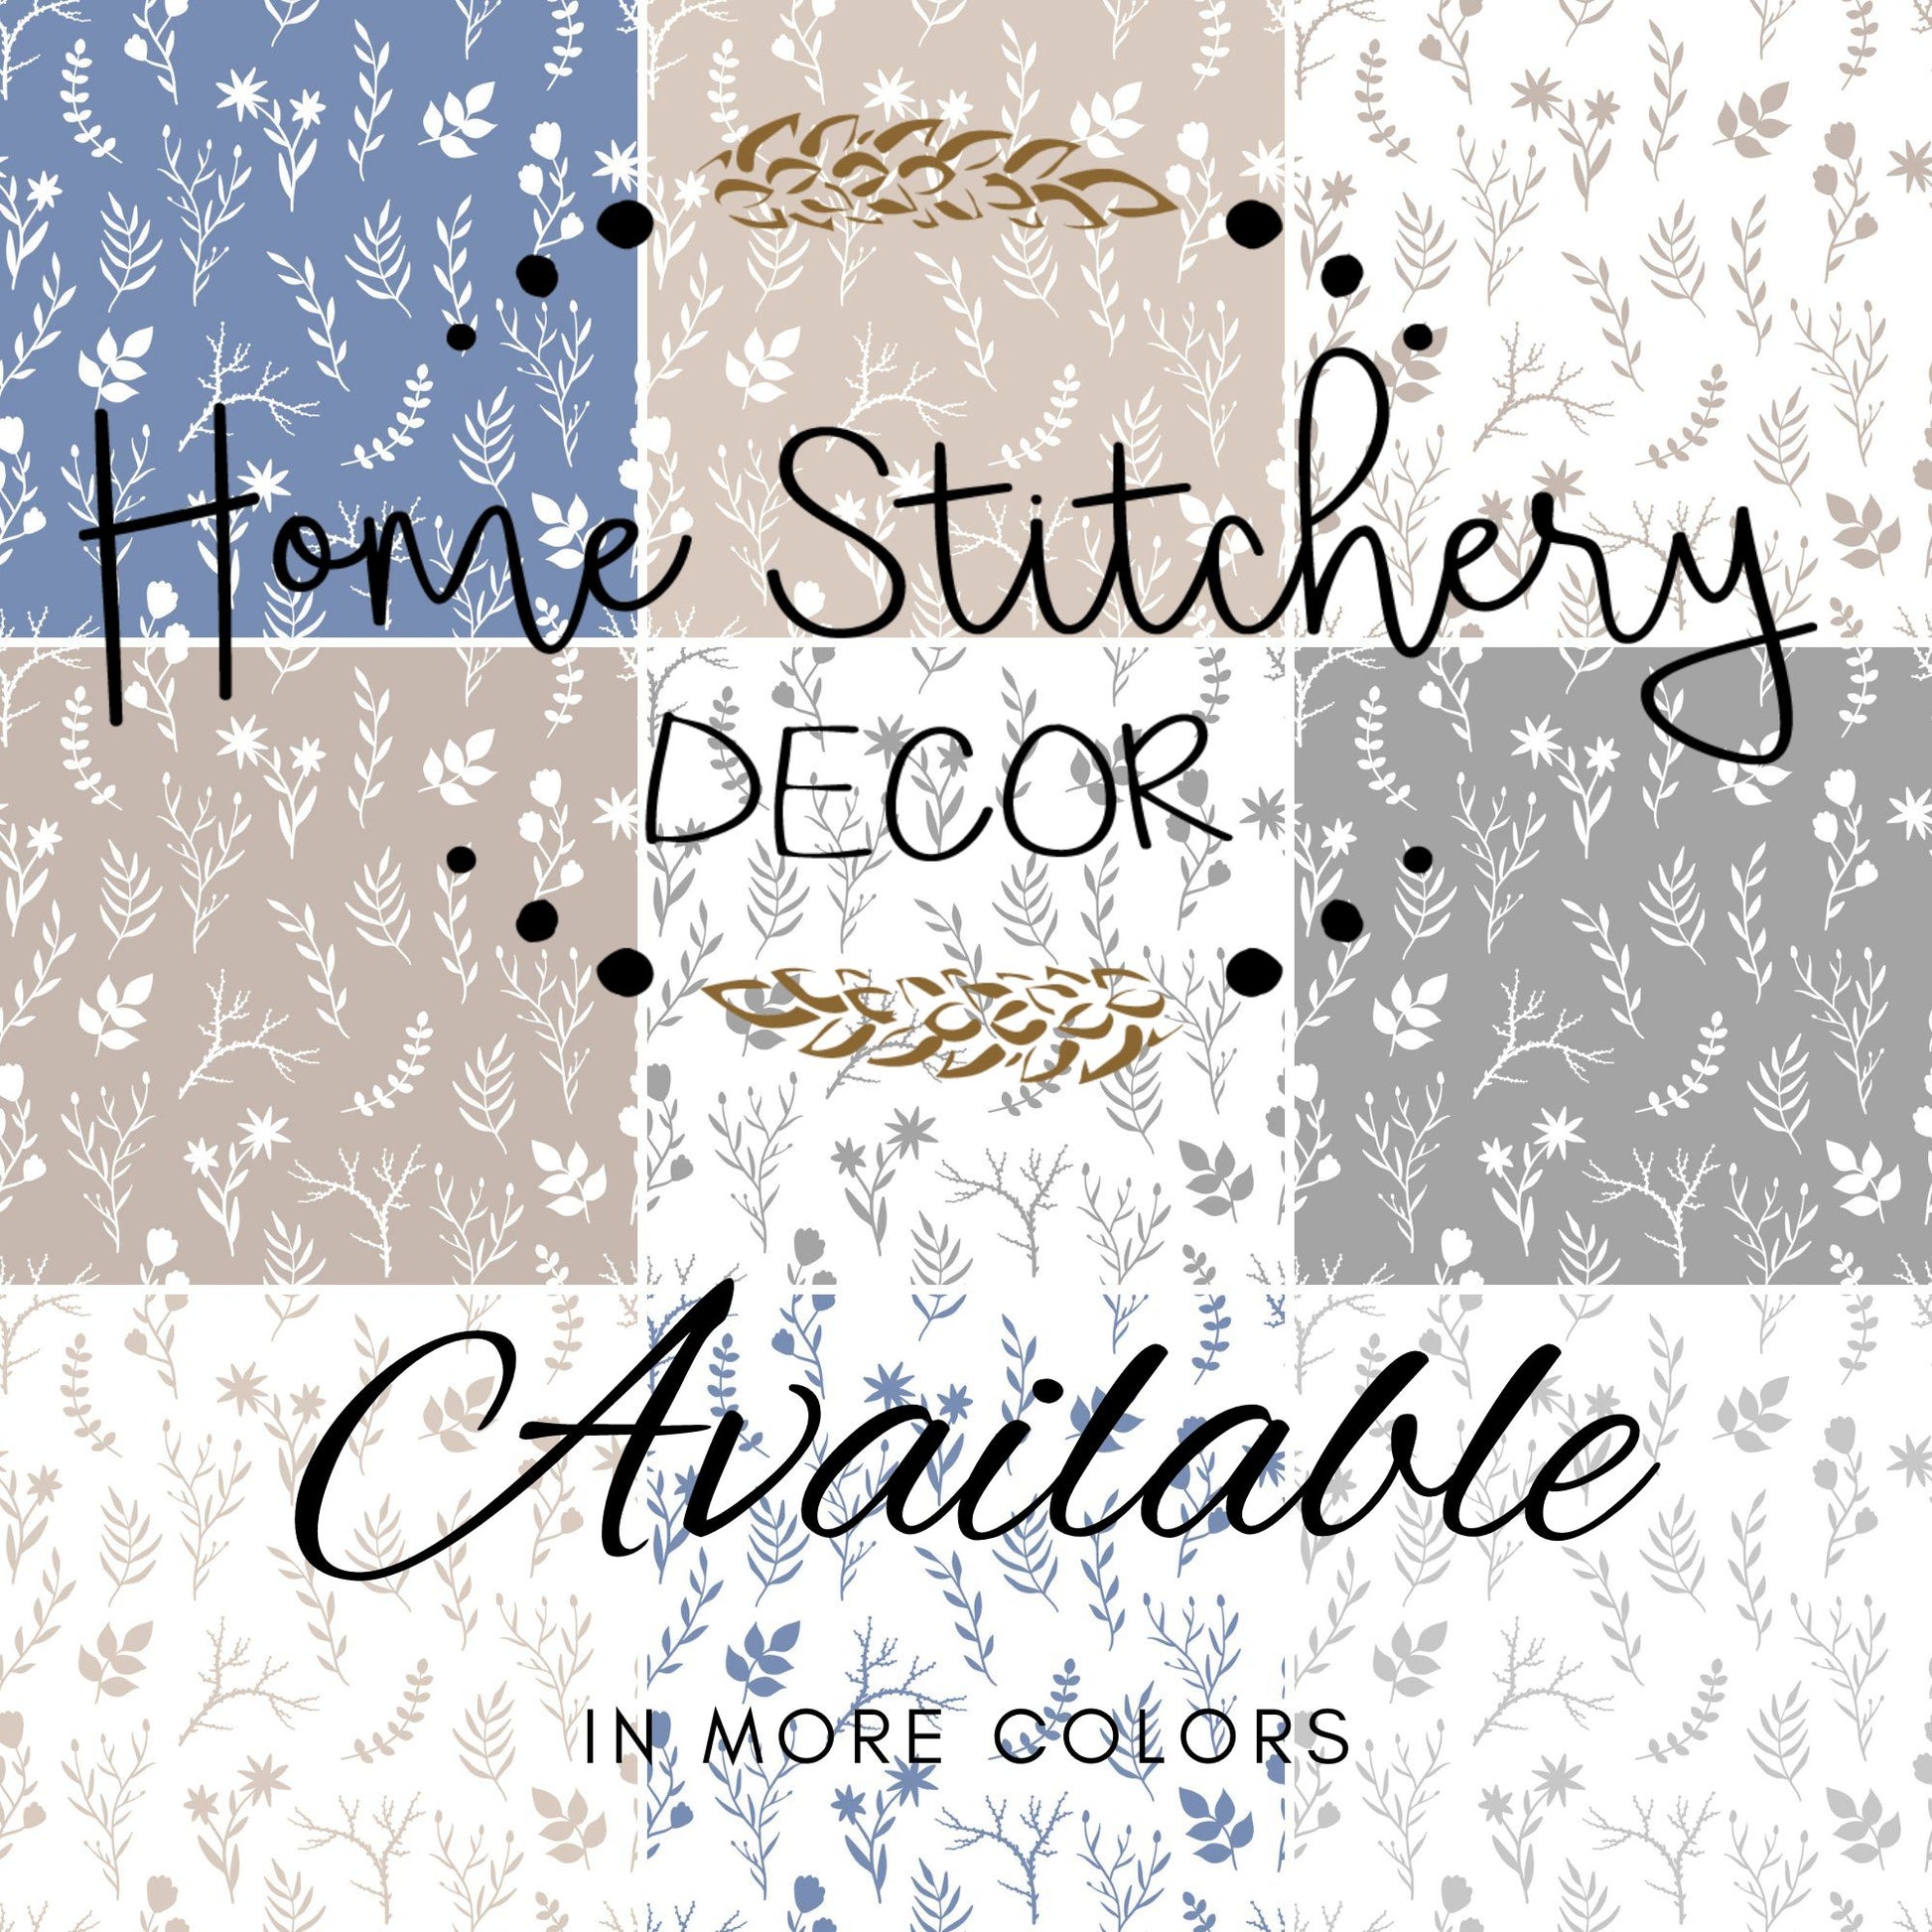 Washing instructions for modern floral print pillowcases. Exclusively designed by Home Stitchery Decor with modern farmhouse styling. Shop the mix and match collections or follow along on the Home Stitchery Decor YouTube Channel.